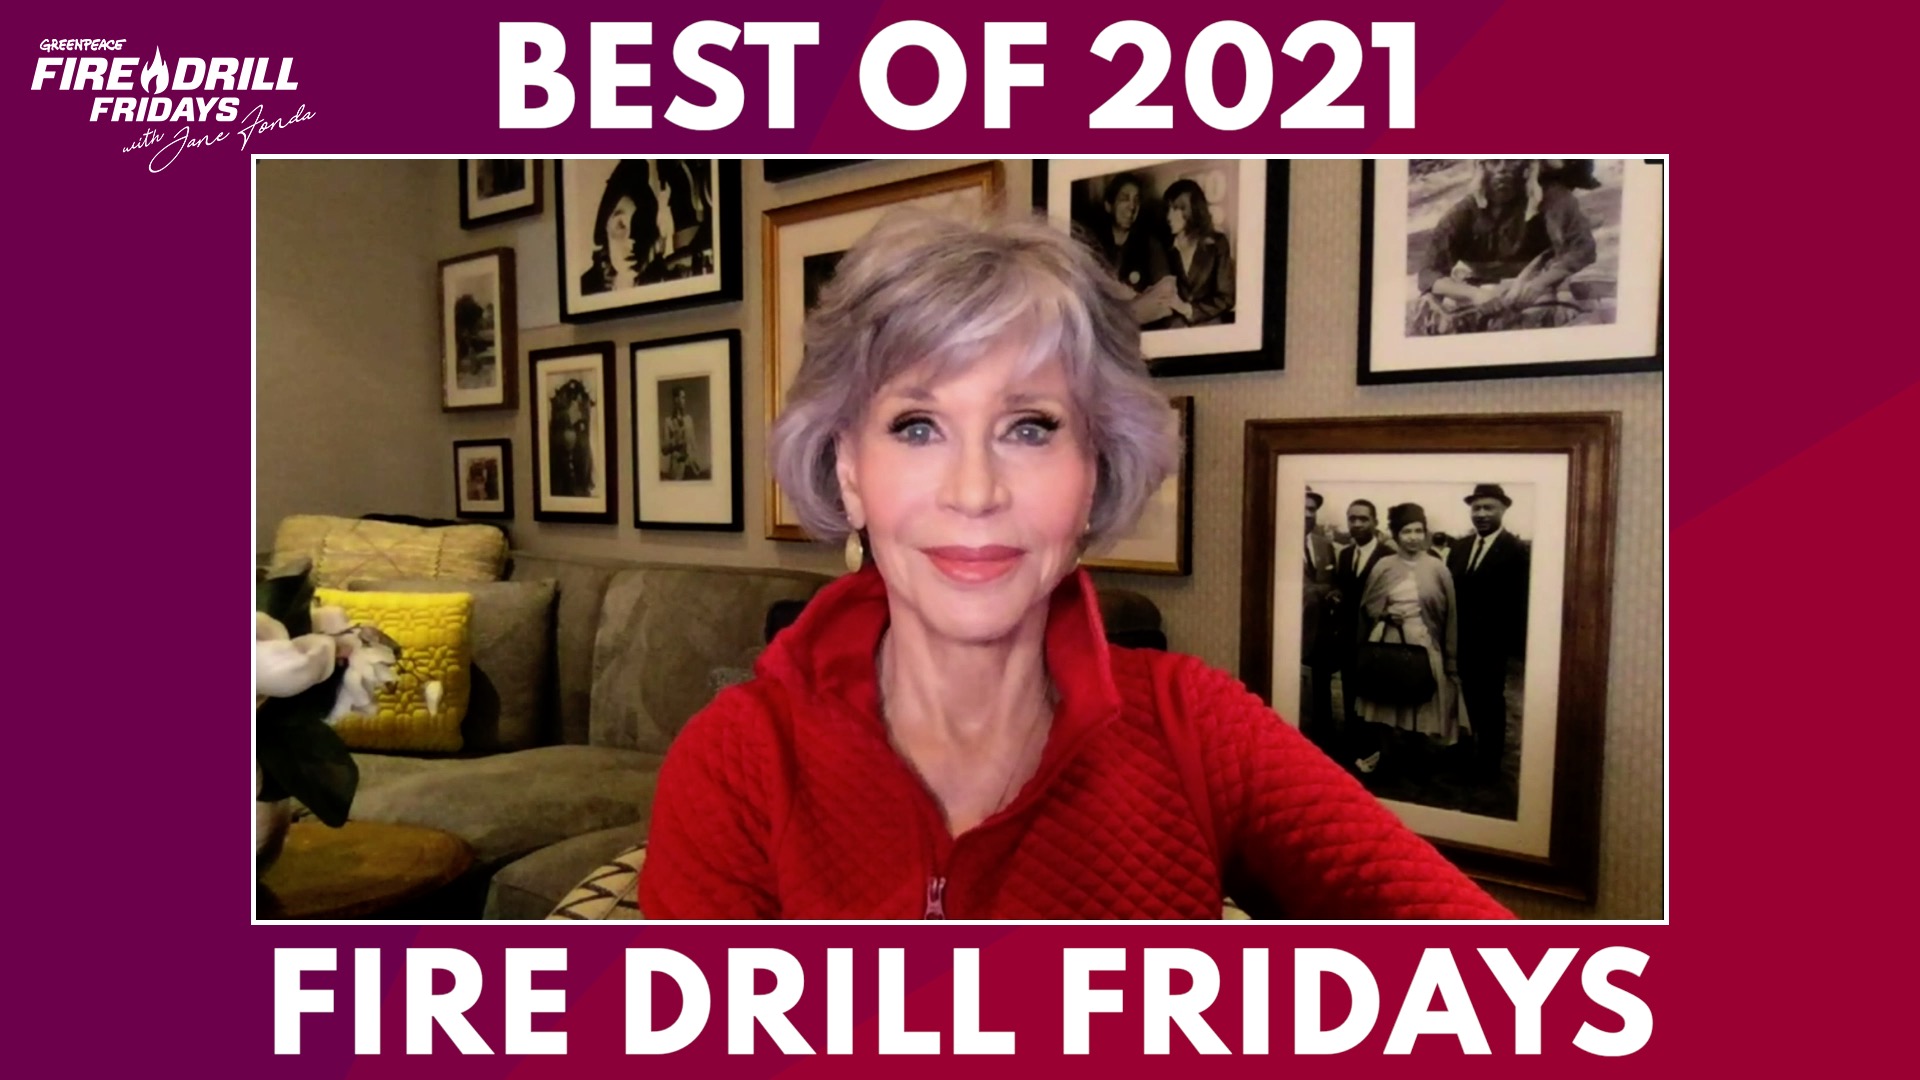 Watch The Most Inspiring and Memorable Moments of Fire Drill Fridays in 2021